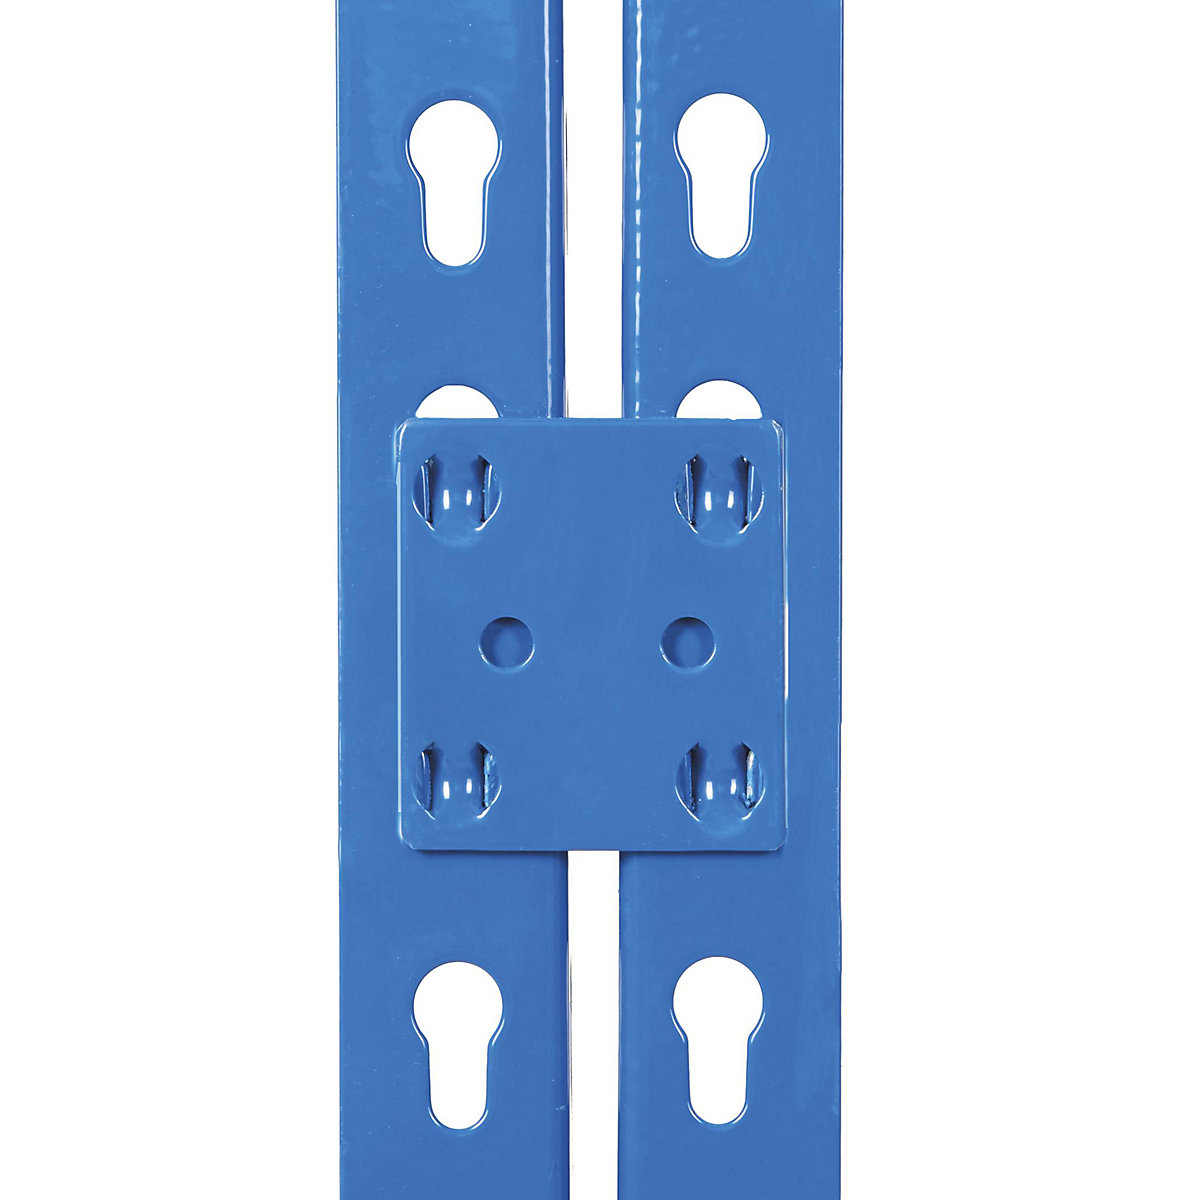 Tie plates for racking with 200 kg maximum load